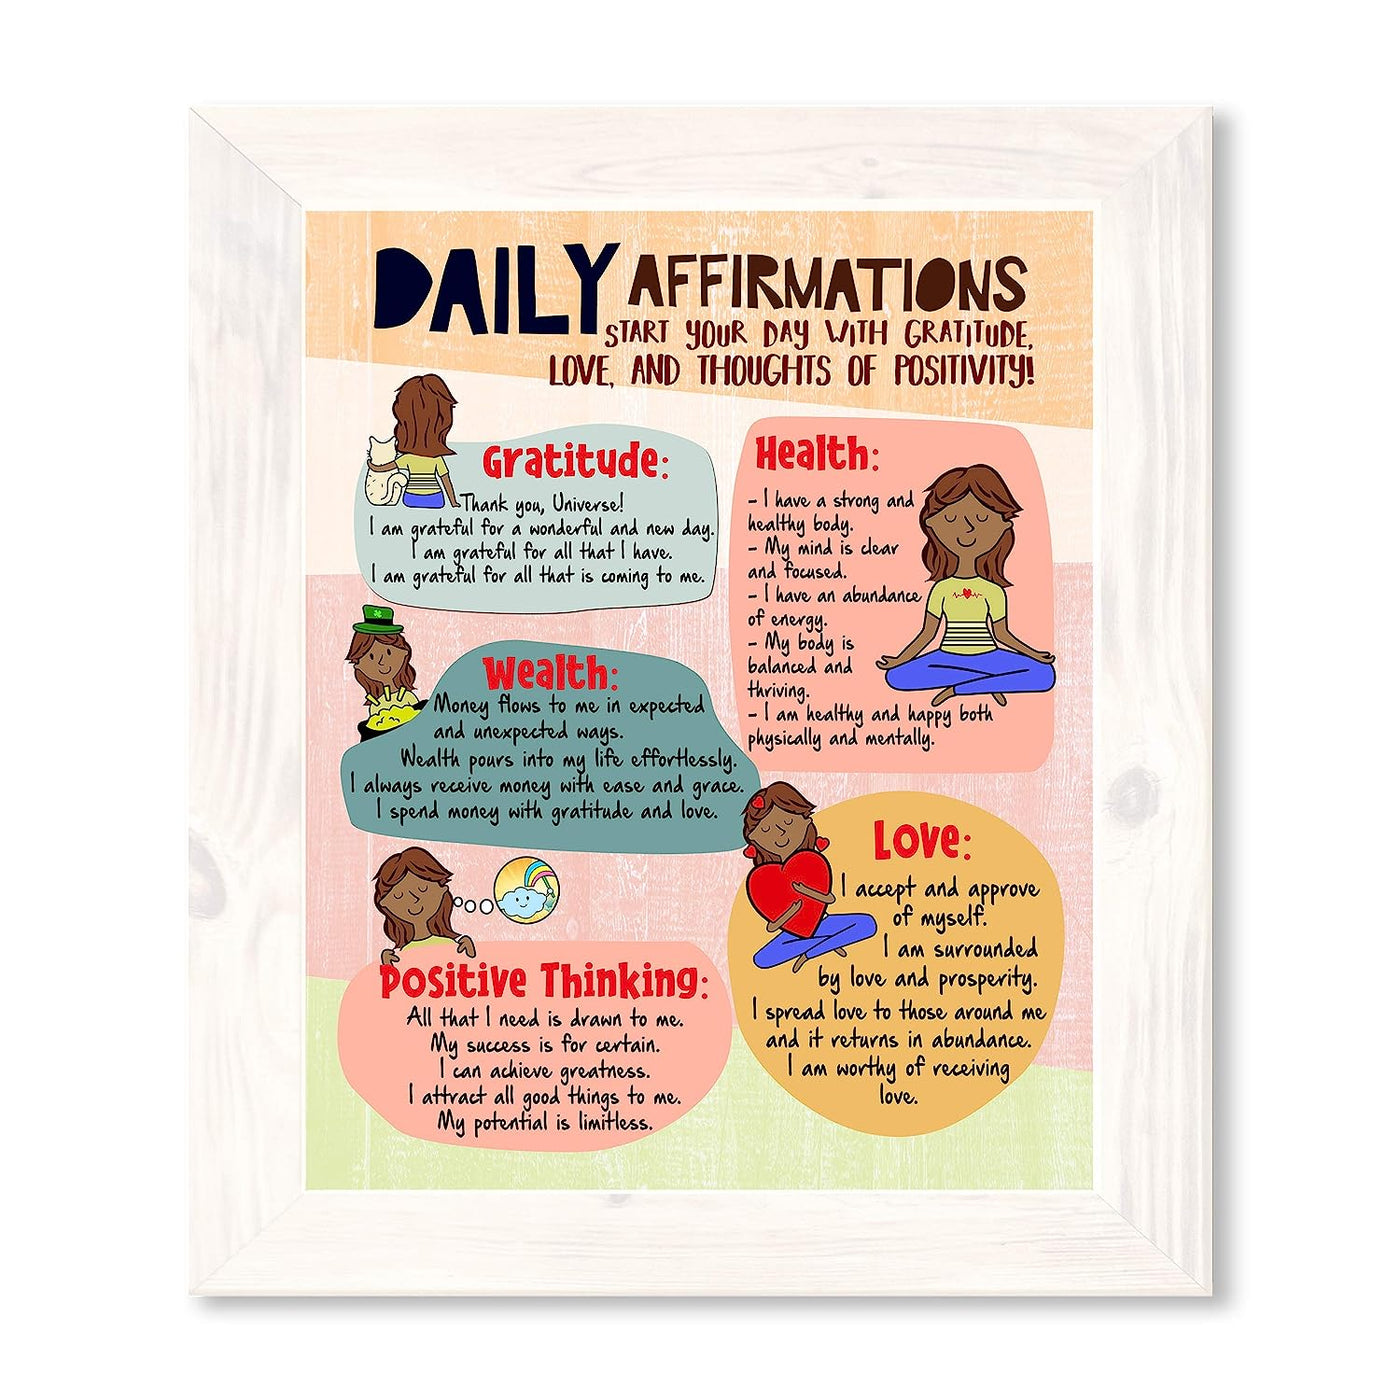 Daily Affirmations to Start Your Day Motivational Quotes Wall Decor -11 x 14" Typographic Art Print-Ready to Frame. Inspirational Home-Office-Studio-School-Zen Decor. Positive Sign for Mindfulness!